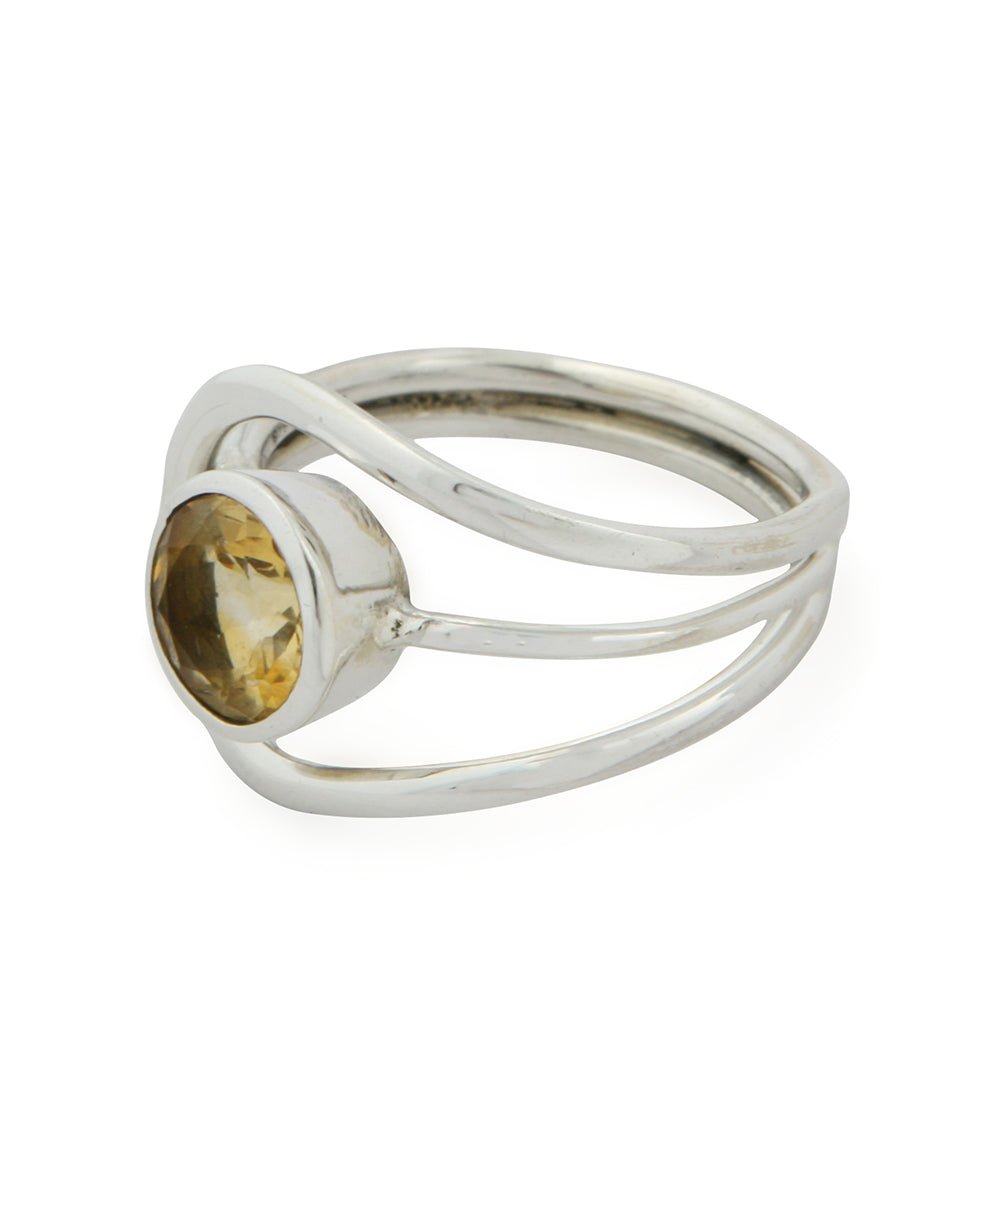 Sterling Silver Loop Ring with Citrine Gemstone - Rings Size 6